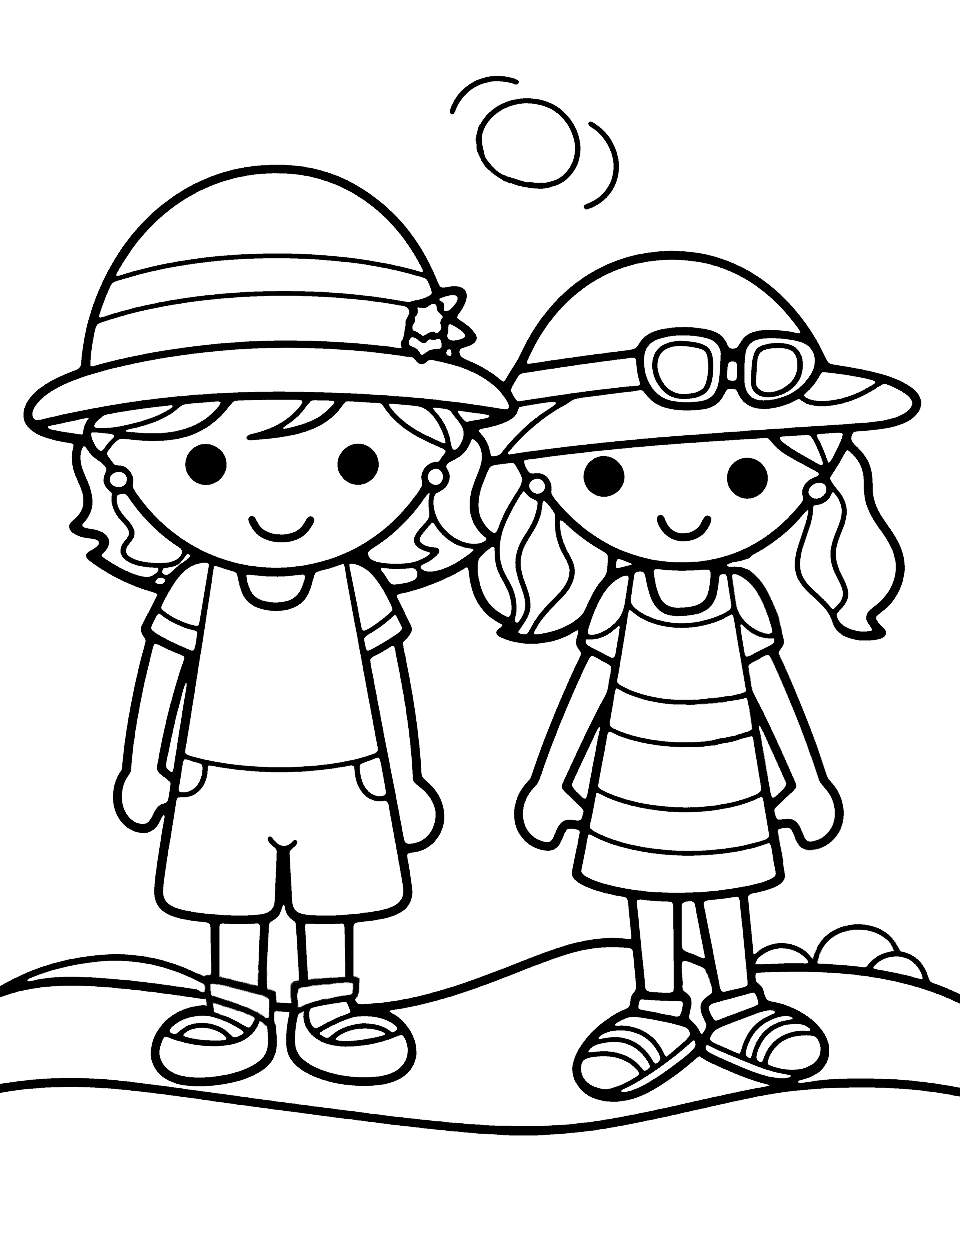 Cute Summer Outfits Coloring Page - Kids dressed up in cute summer clothing such as sun hats, sunglasses, and floral dresses.